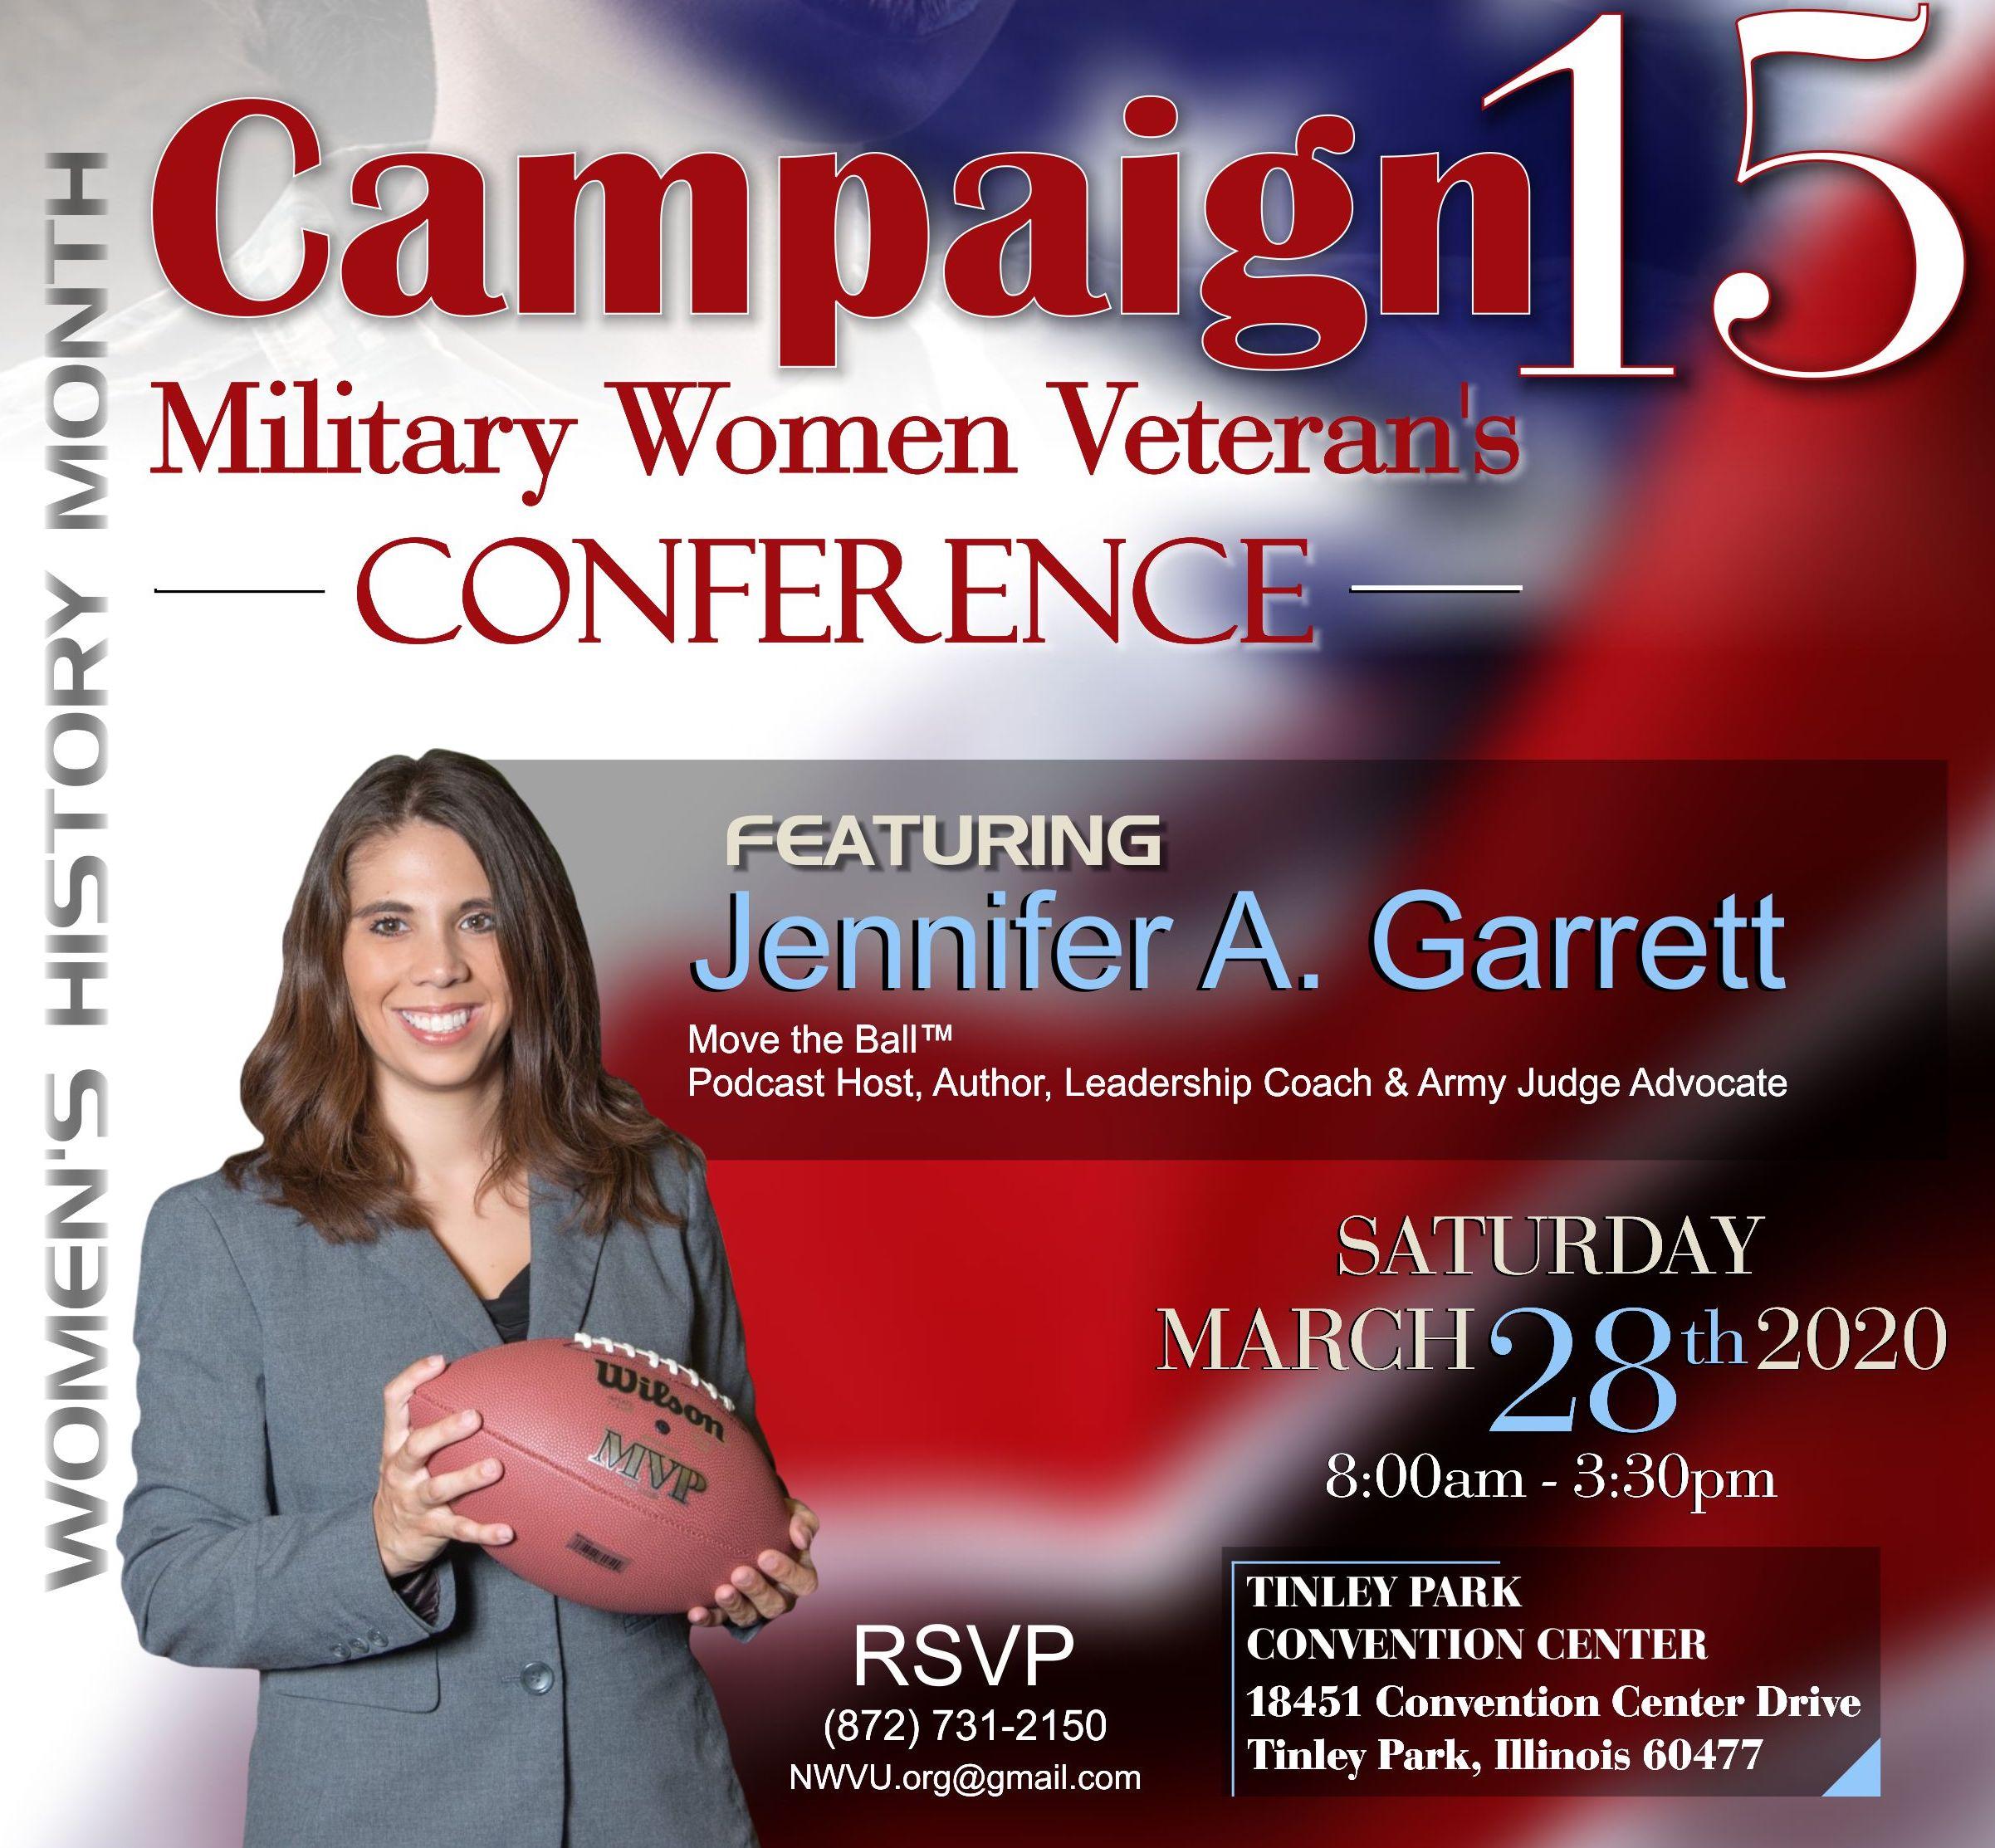  CANCELED - Military Women Veteran's Conference